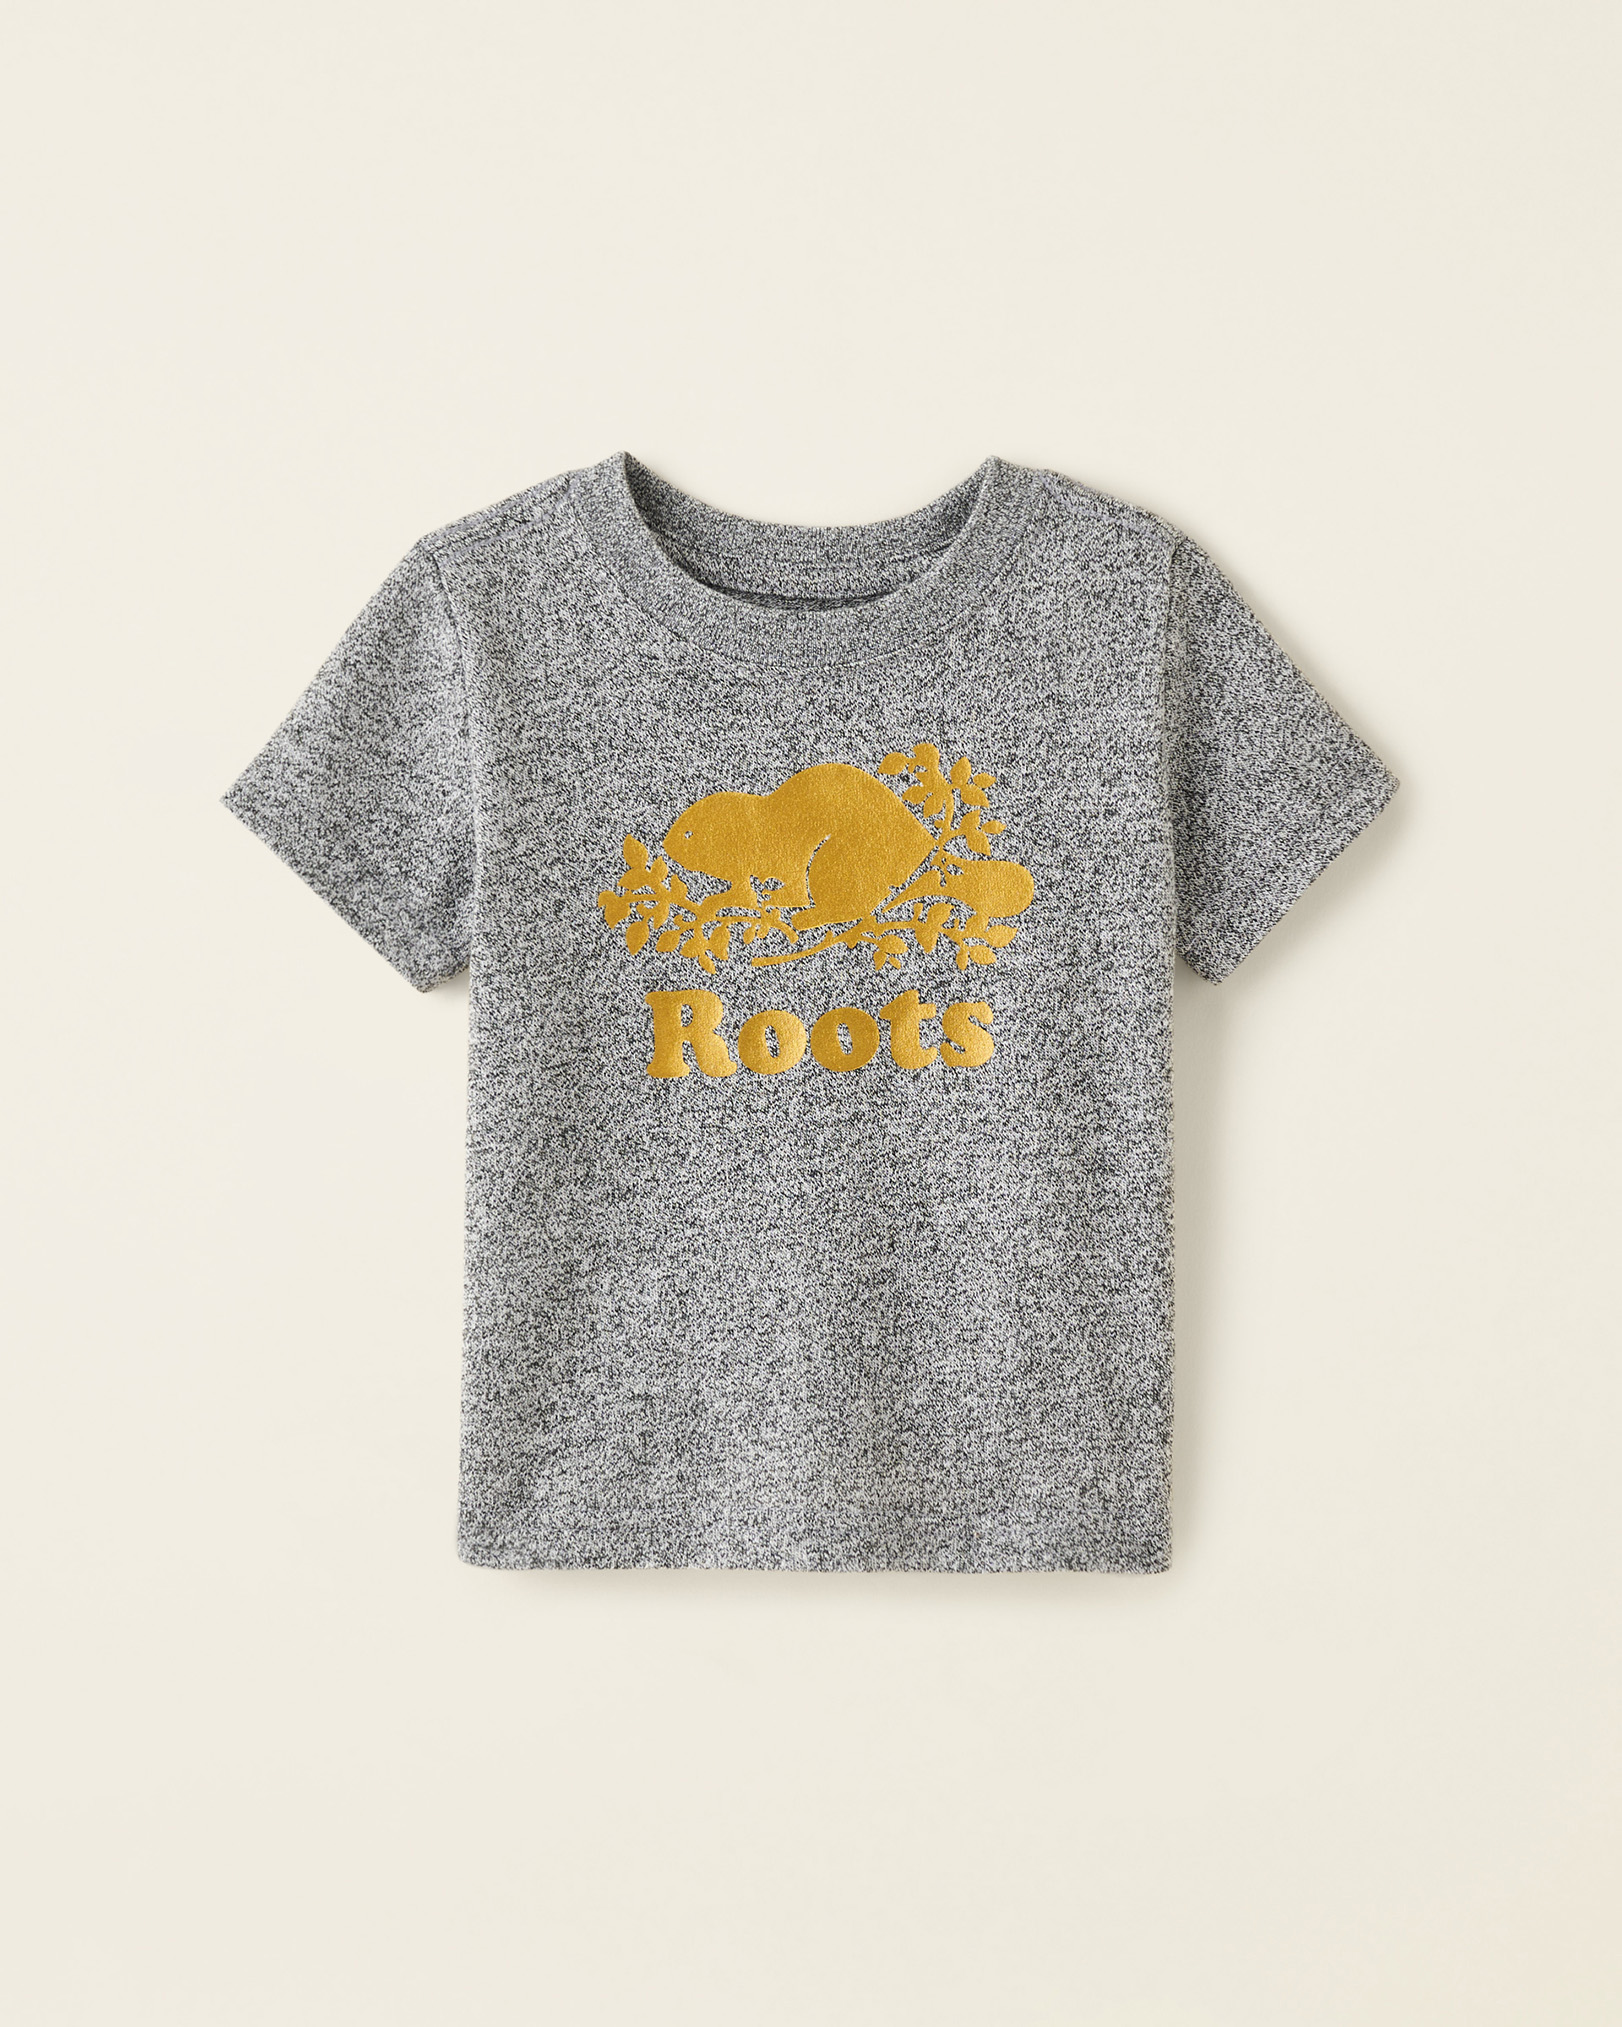 Roots Baby 50th Cooper T-Shirt in Salt/Pepper